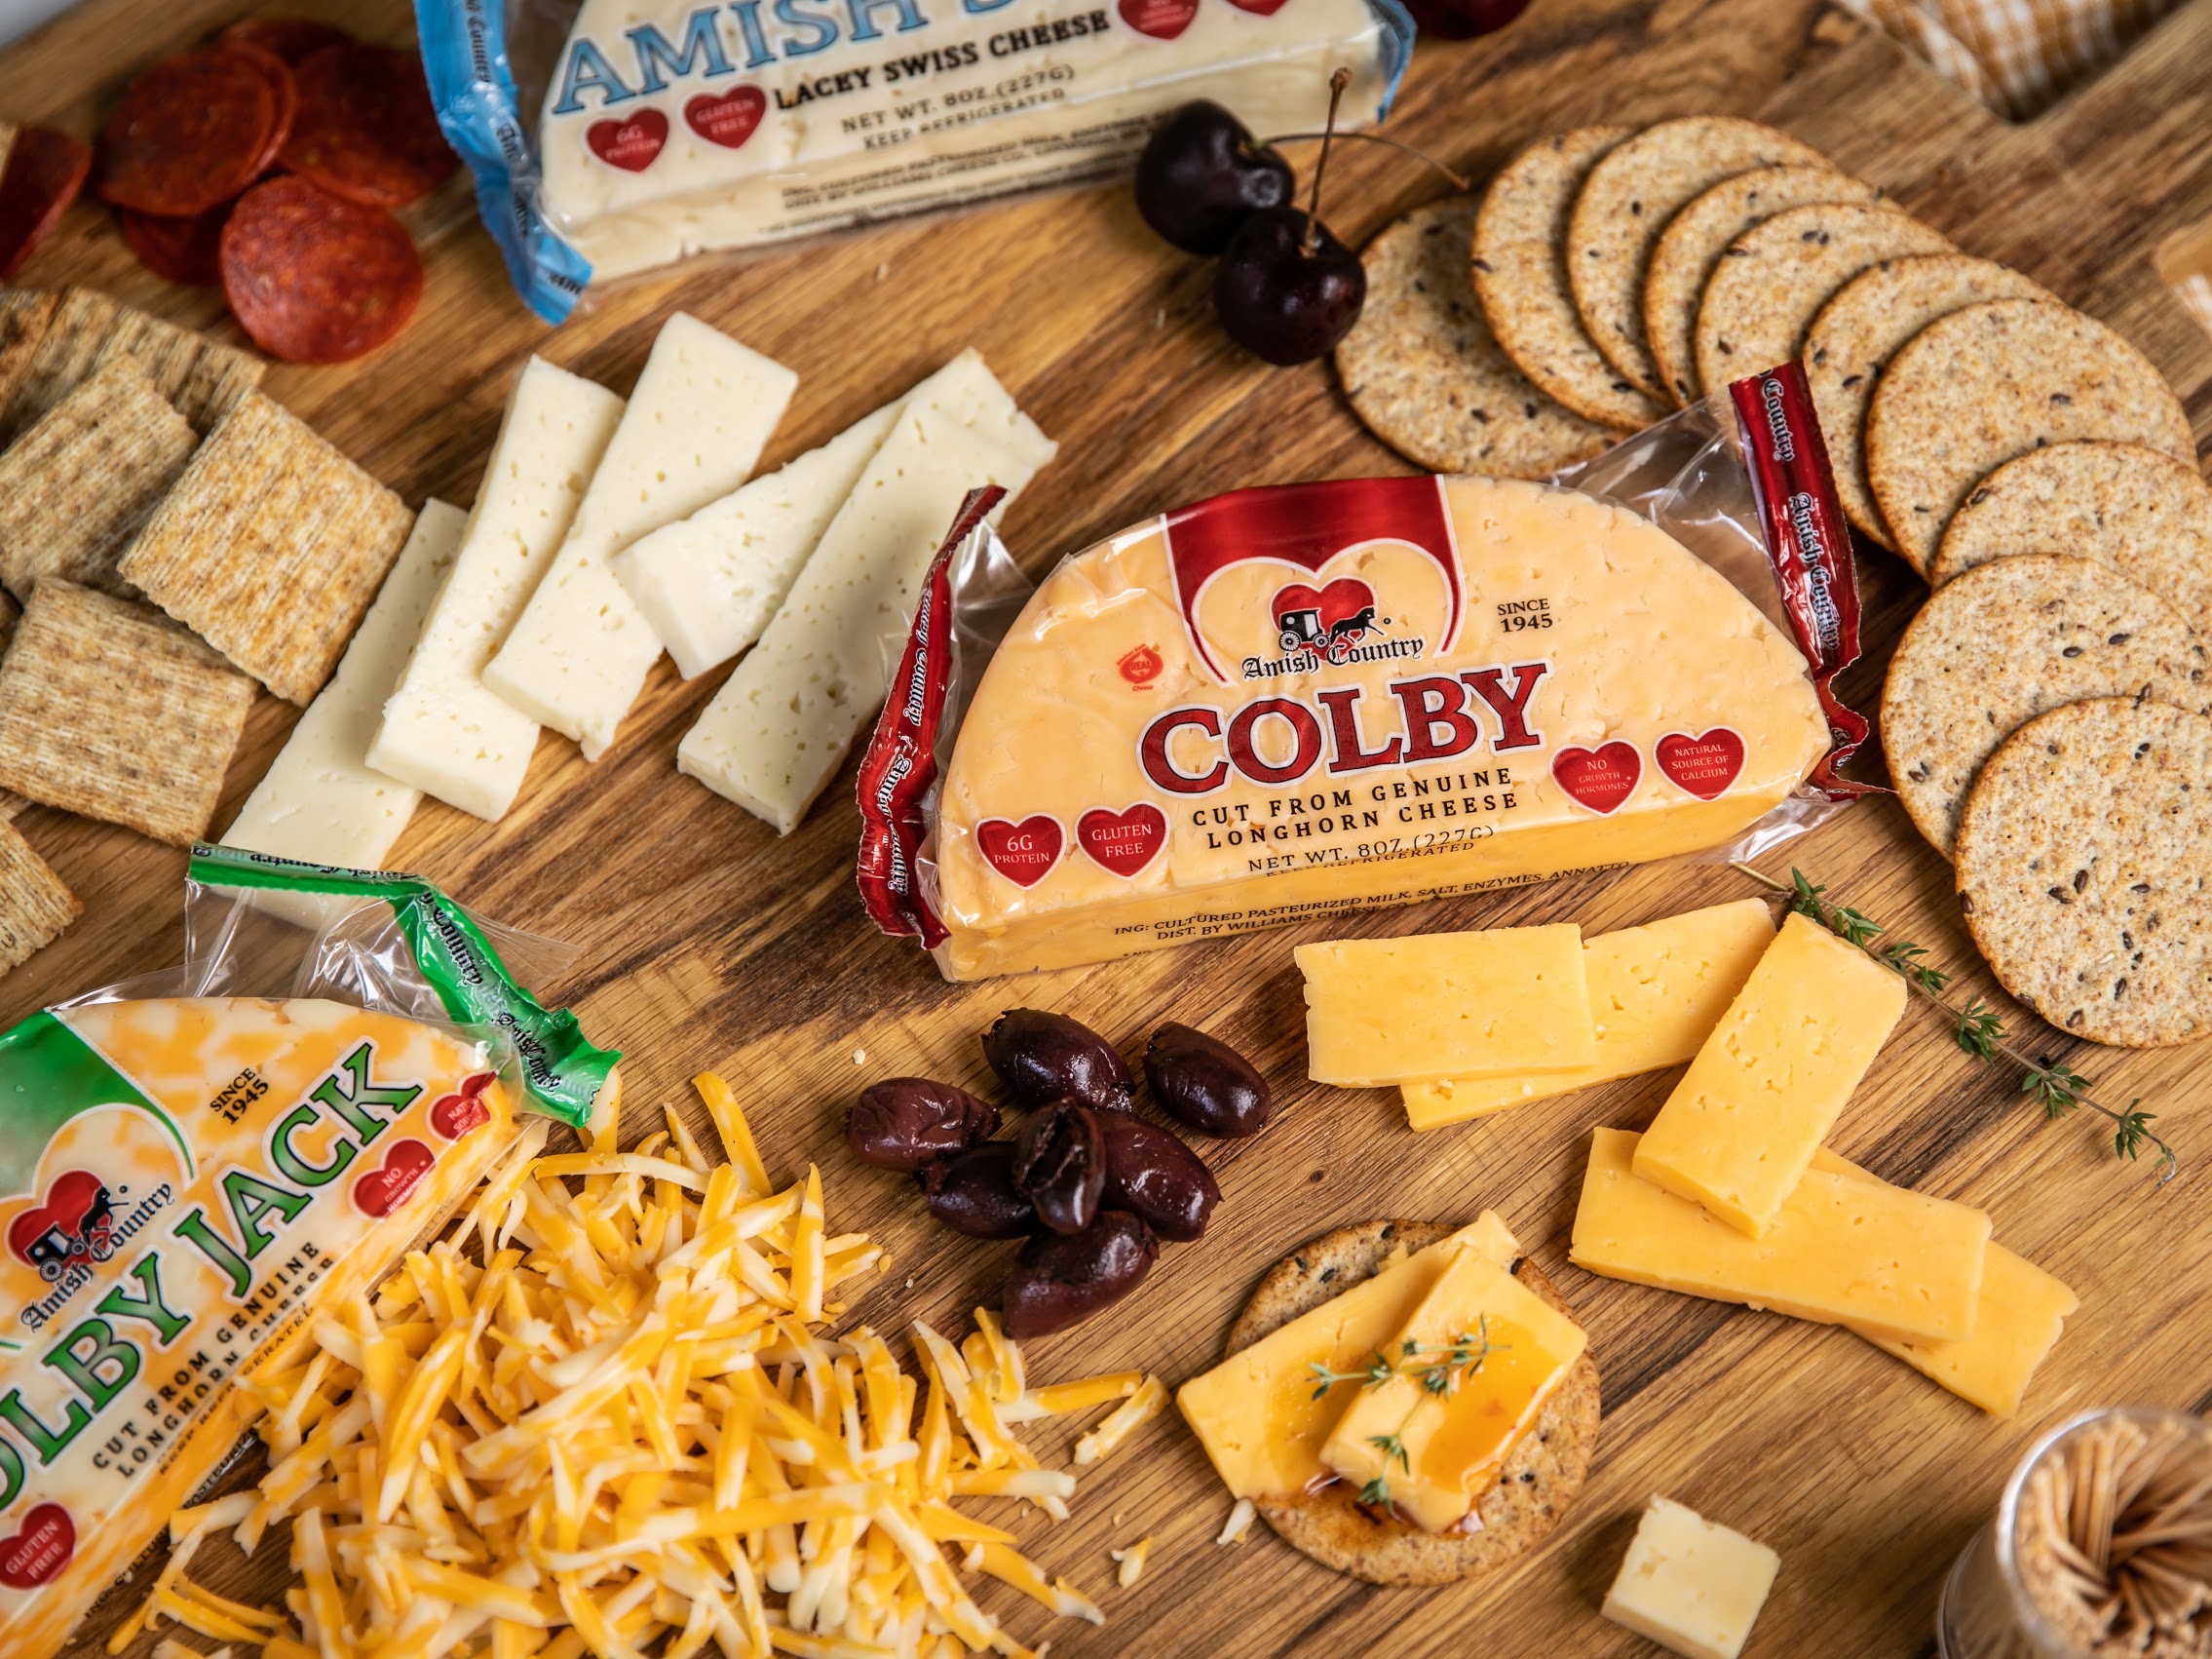 Amish Country Cheese Has A New Look - Five Readers Can Stock Up With A $50 Publix Gift Card! on I Heart Publix